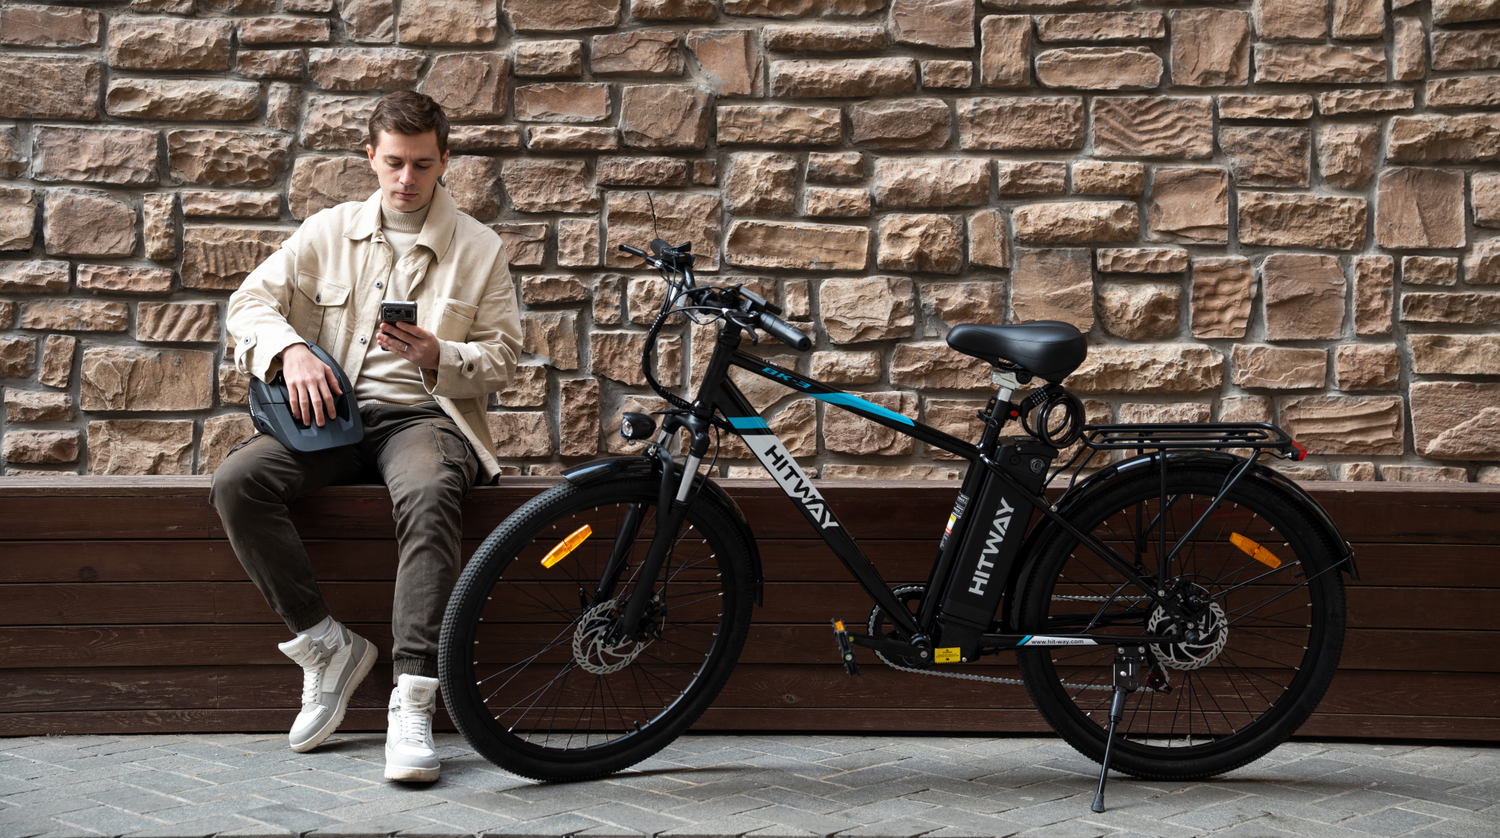 What Are the Benefits of Riding an Electric Bike?